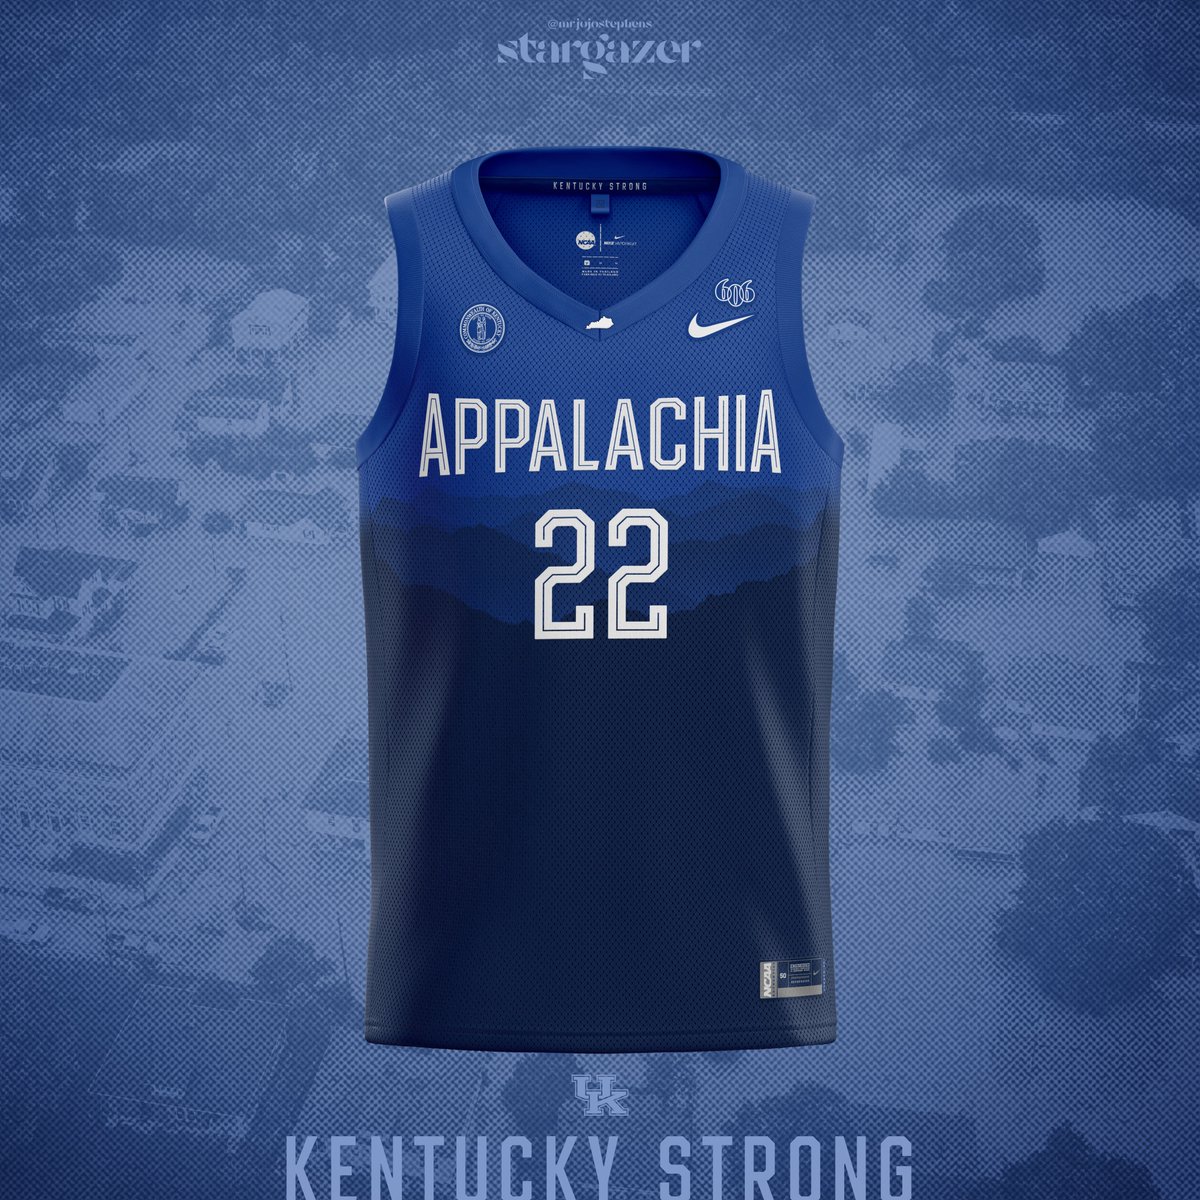 Kentucky Wildcats | 10.24.22 College Basketball Uniform Concept Kentucky Strong | Appalachia Royal feat. @wallace_cason #BBN, let's hear your thoughts & Retweet if you're a fan of these! (Long press to view in 4K HD + a detailed look in thread below)